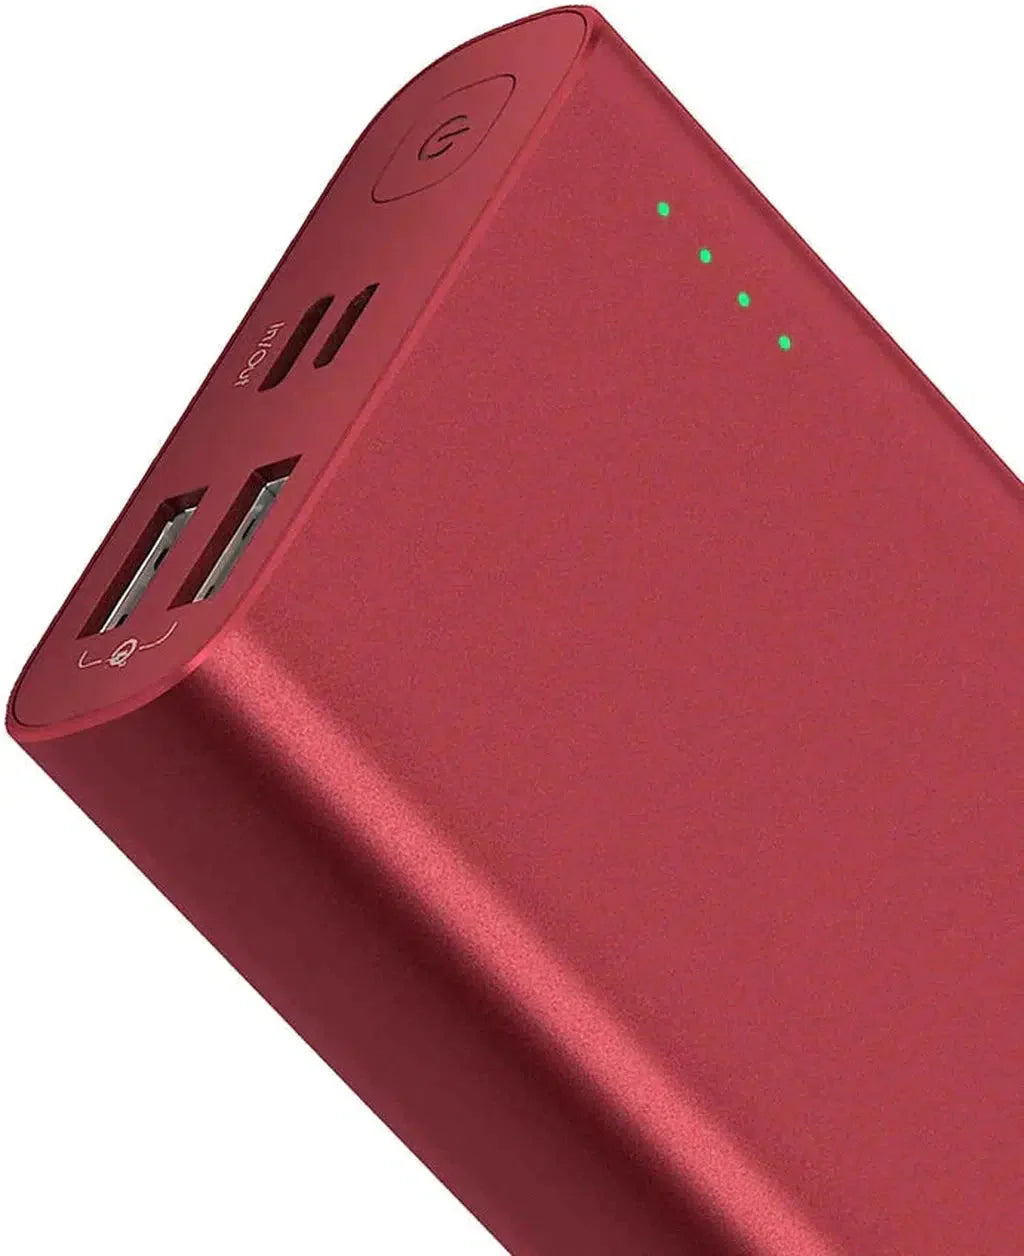 Aukey,  Power Bank with Quick Charge 3.0 & Power Delivery,  2x USB QC3.0 port + USB-C (10000mAh) (Red) -  PB-XD12 RD